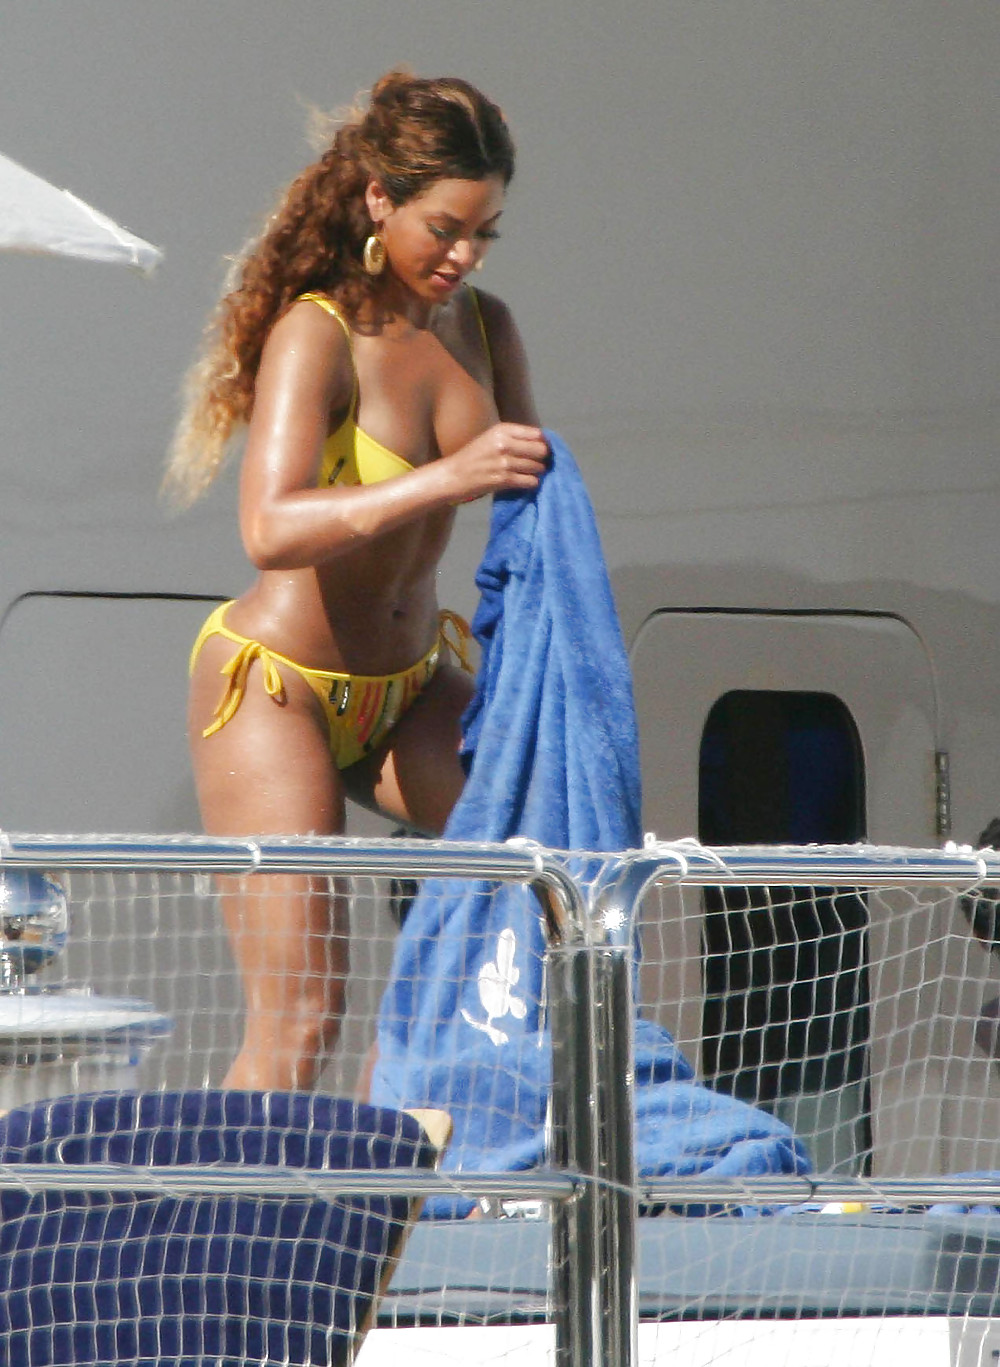 La grosse chienne de beyonce big ass and boobs of my bitch #37615984